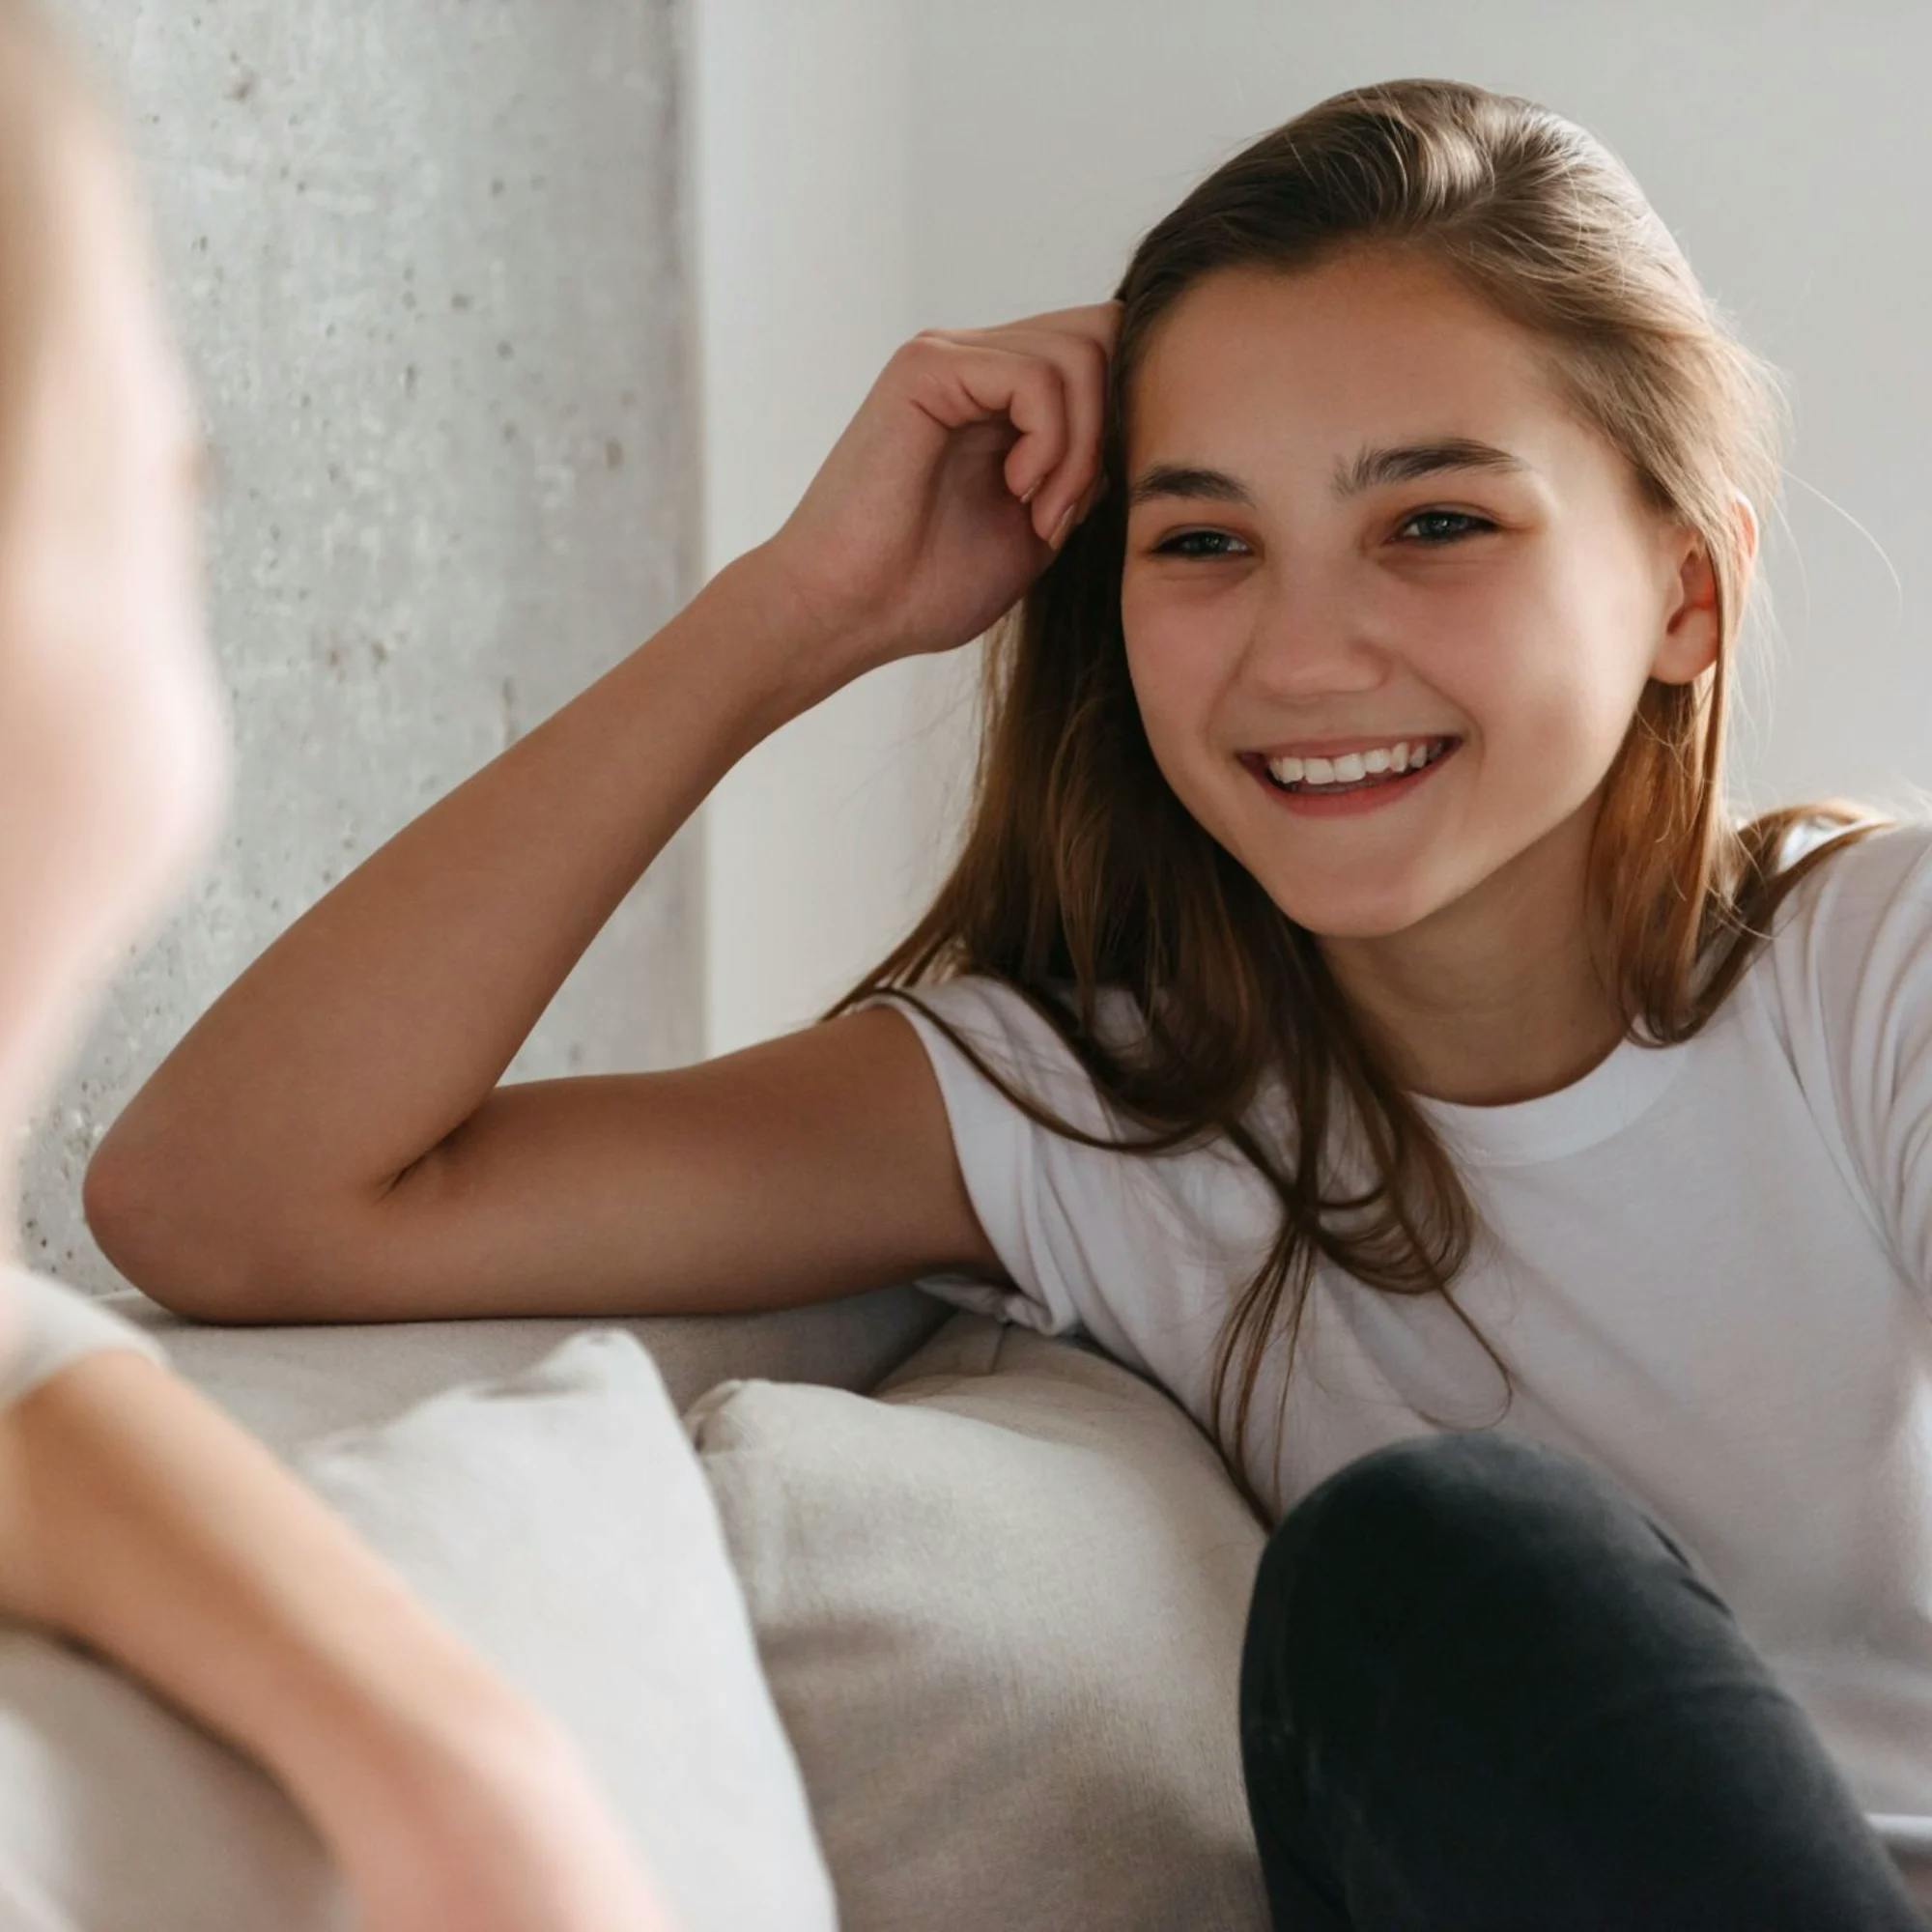 Why Teenagers Receive Speech Therapy and How It Works